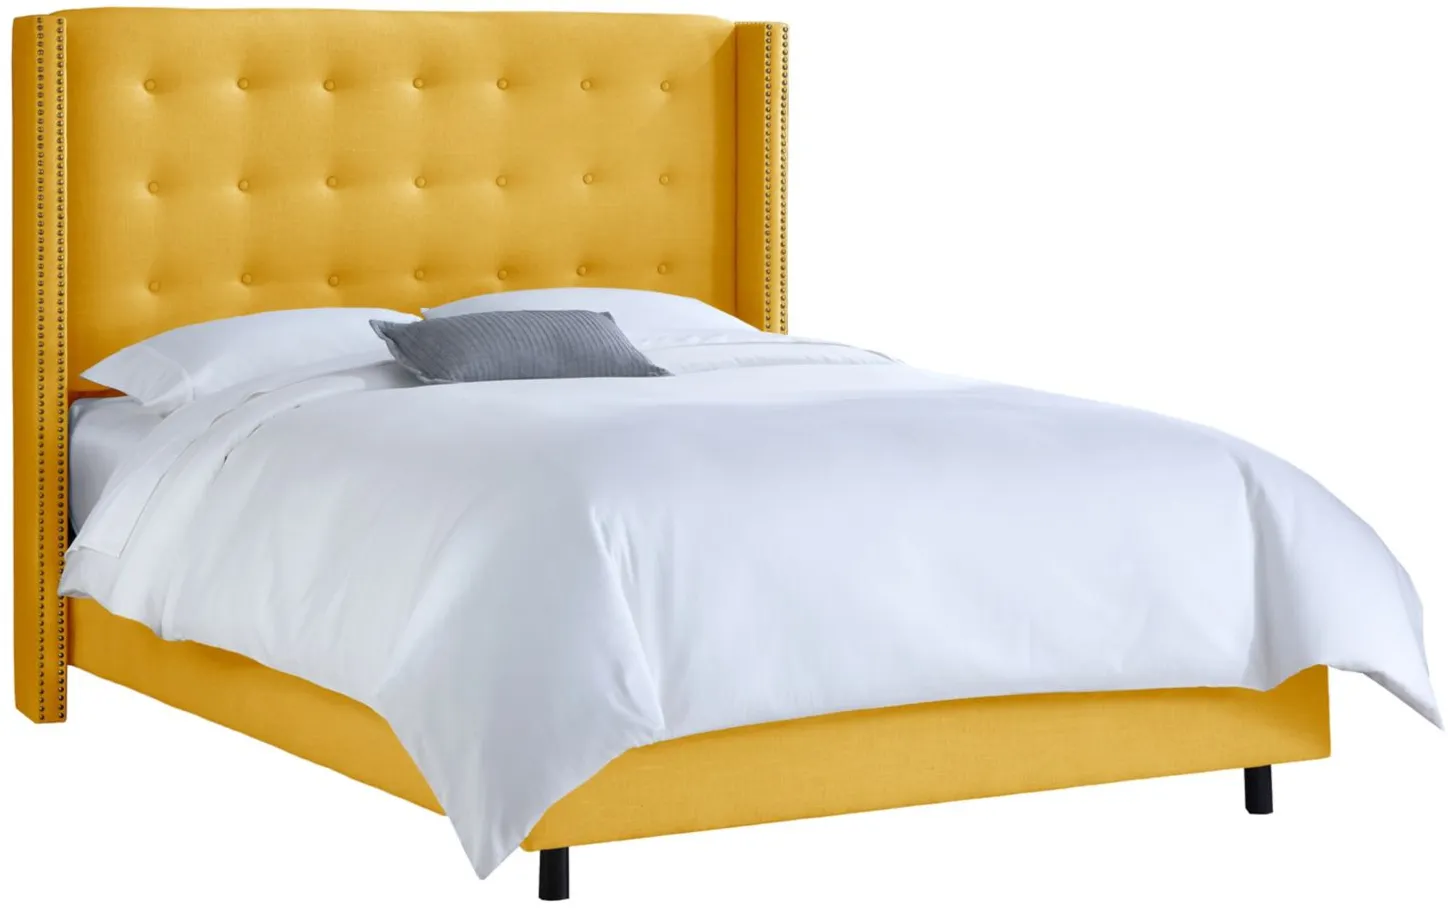 Cranford Wingback Bed in Linen French Yellow by Skyline